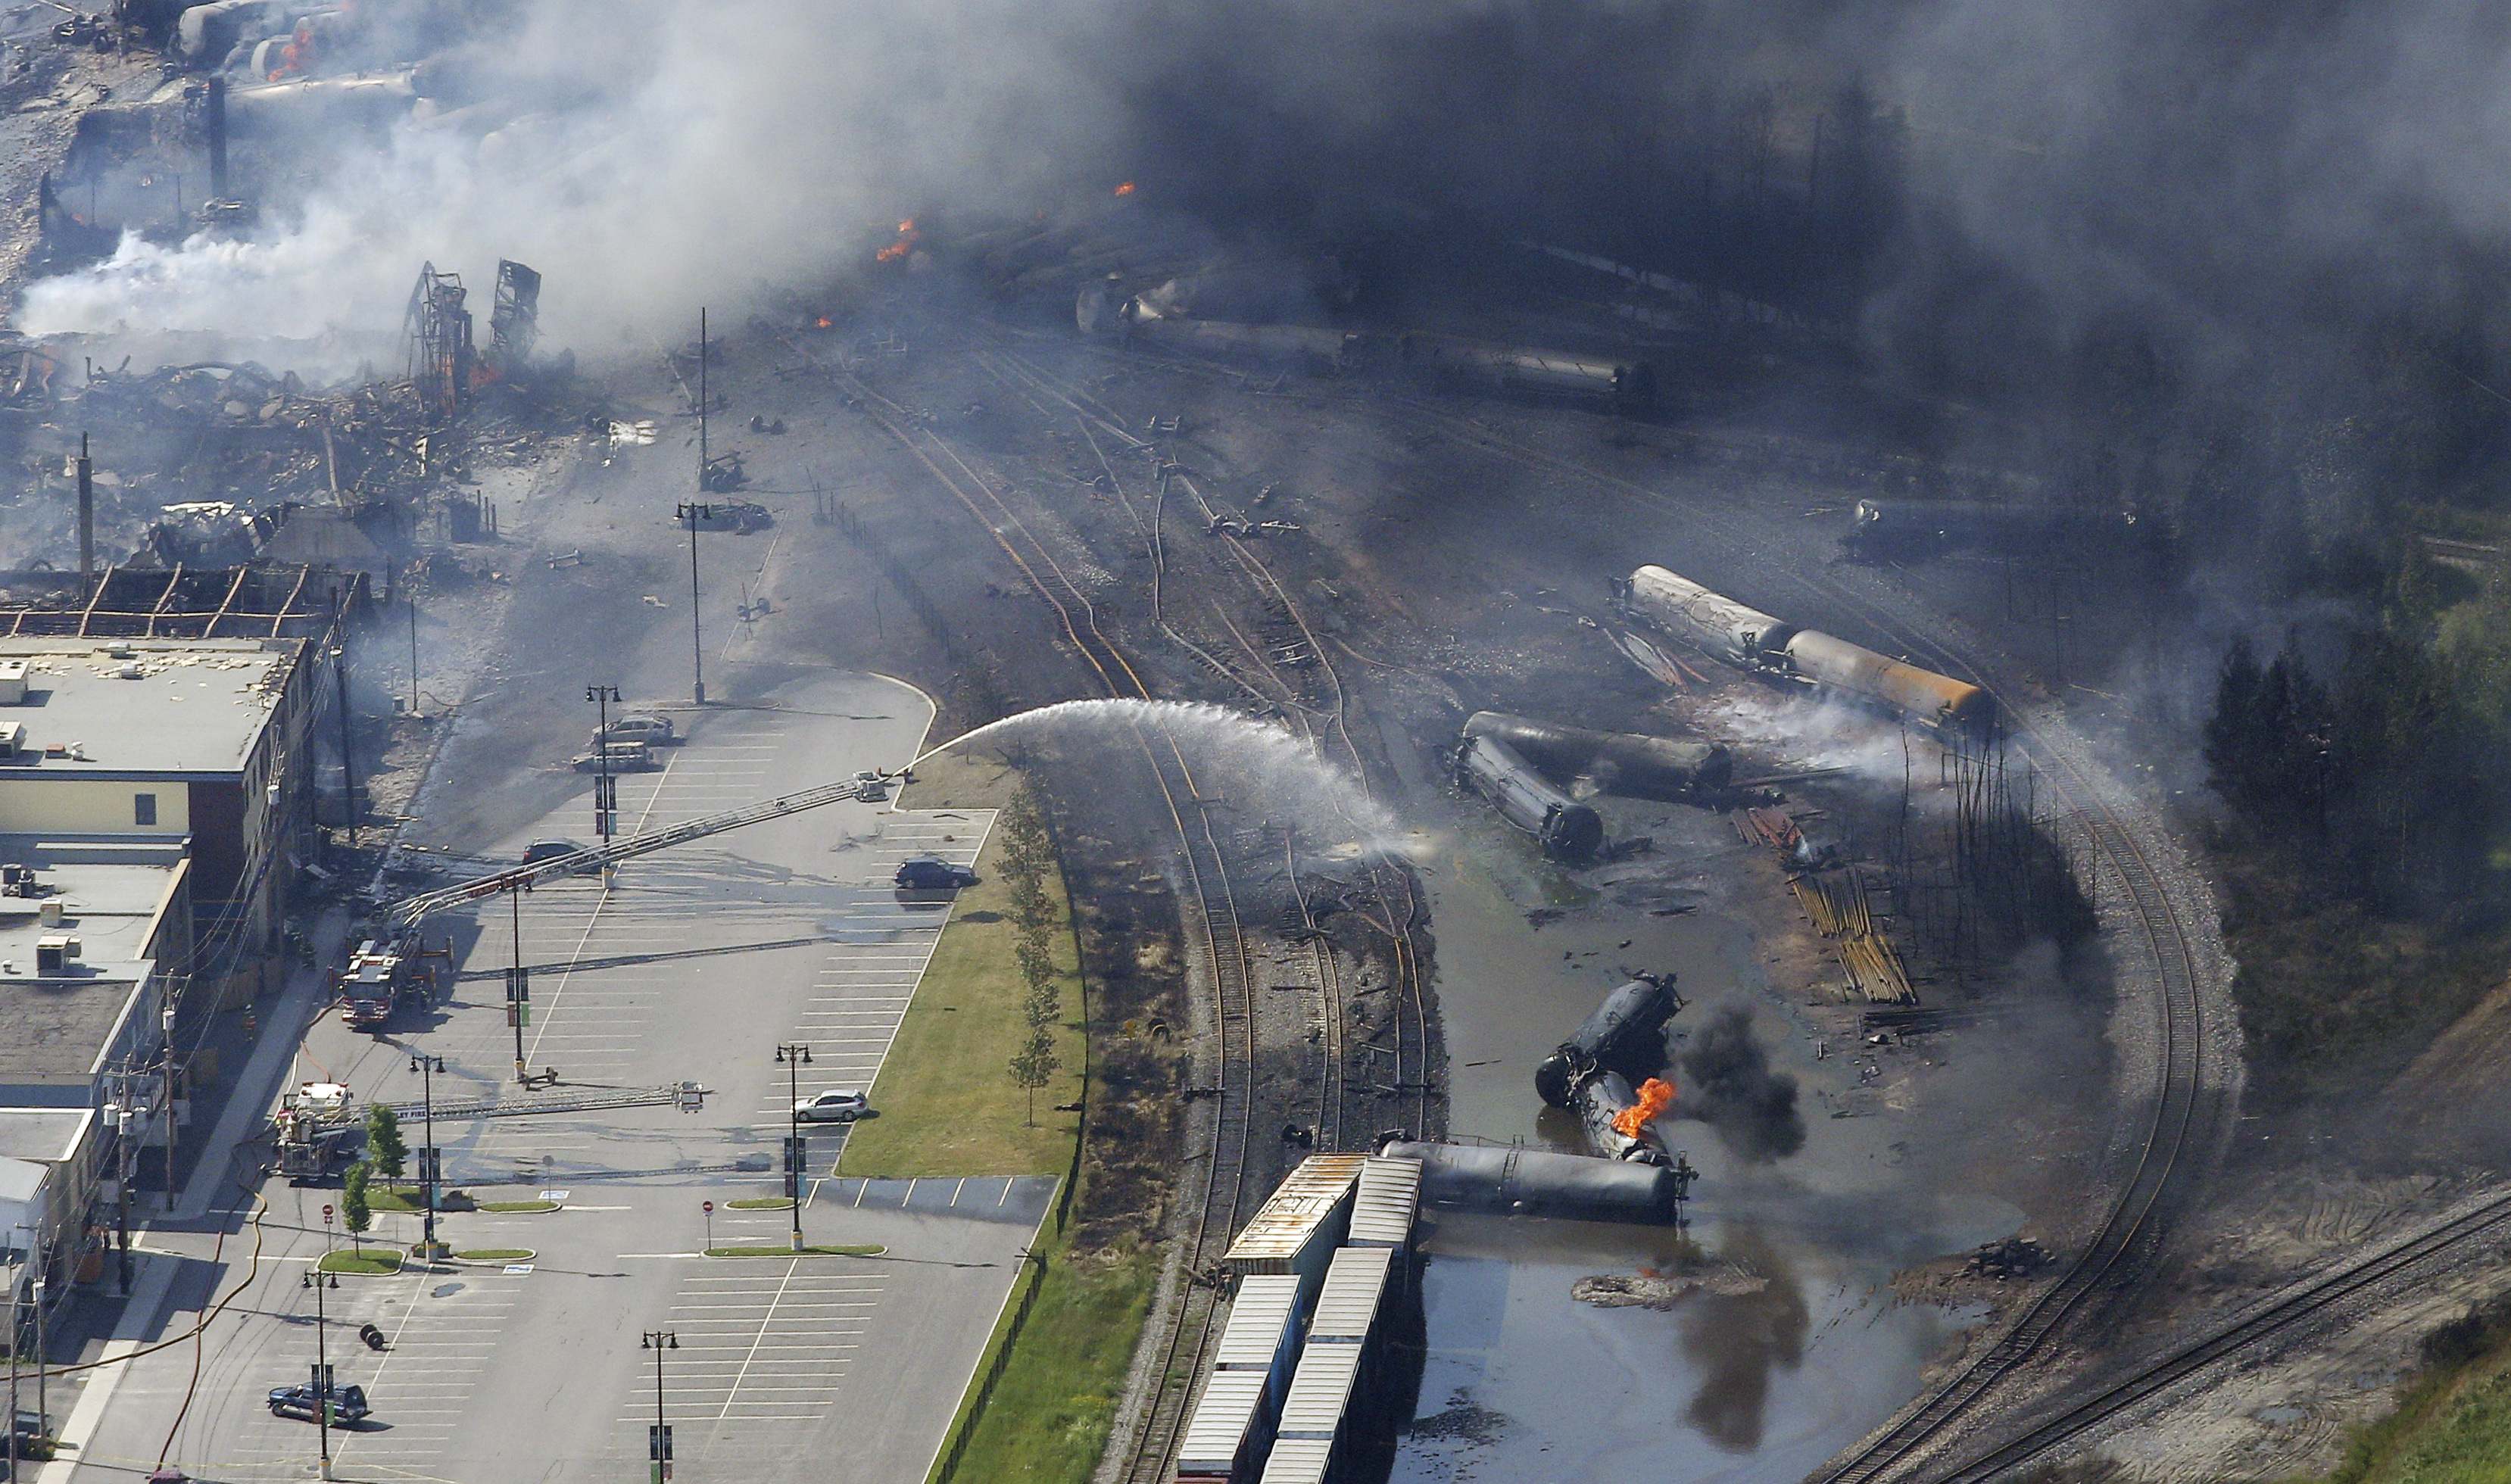 Police order evacuations after train explodes and catches fire in Quebec town